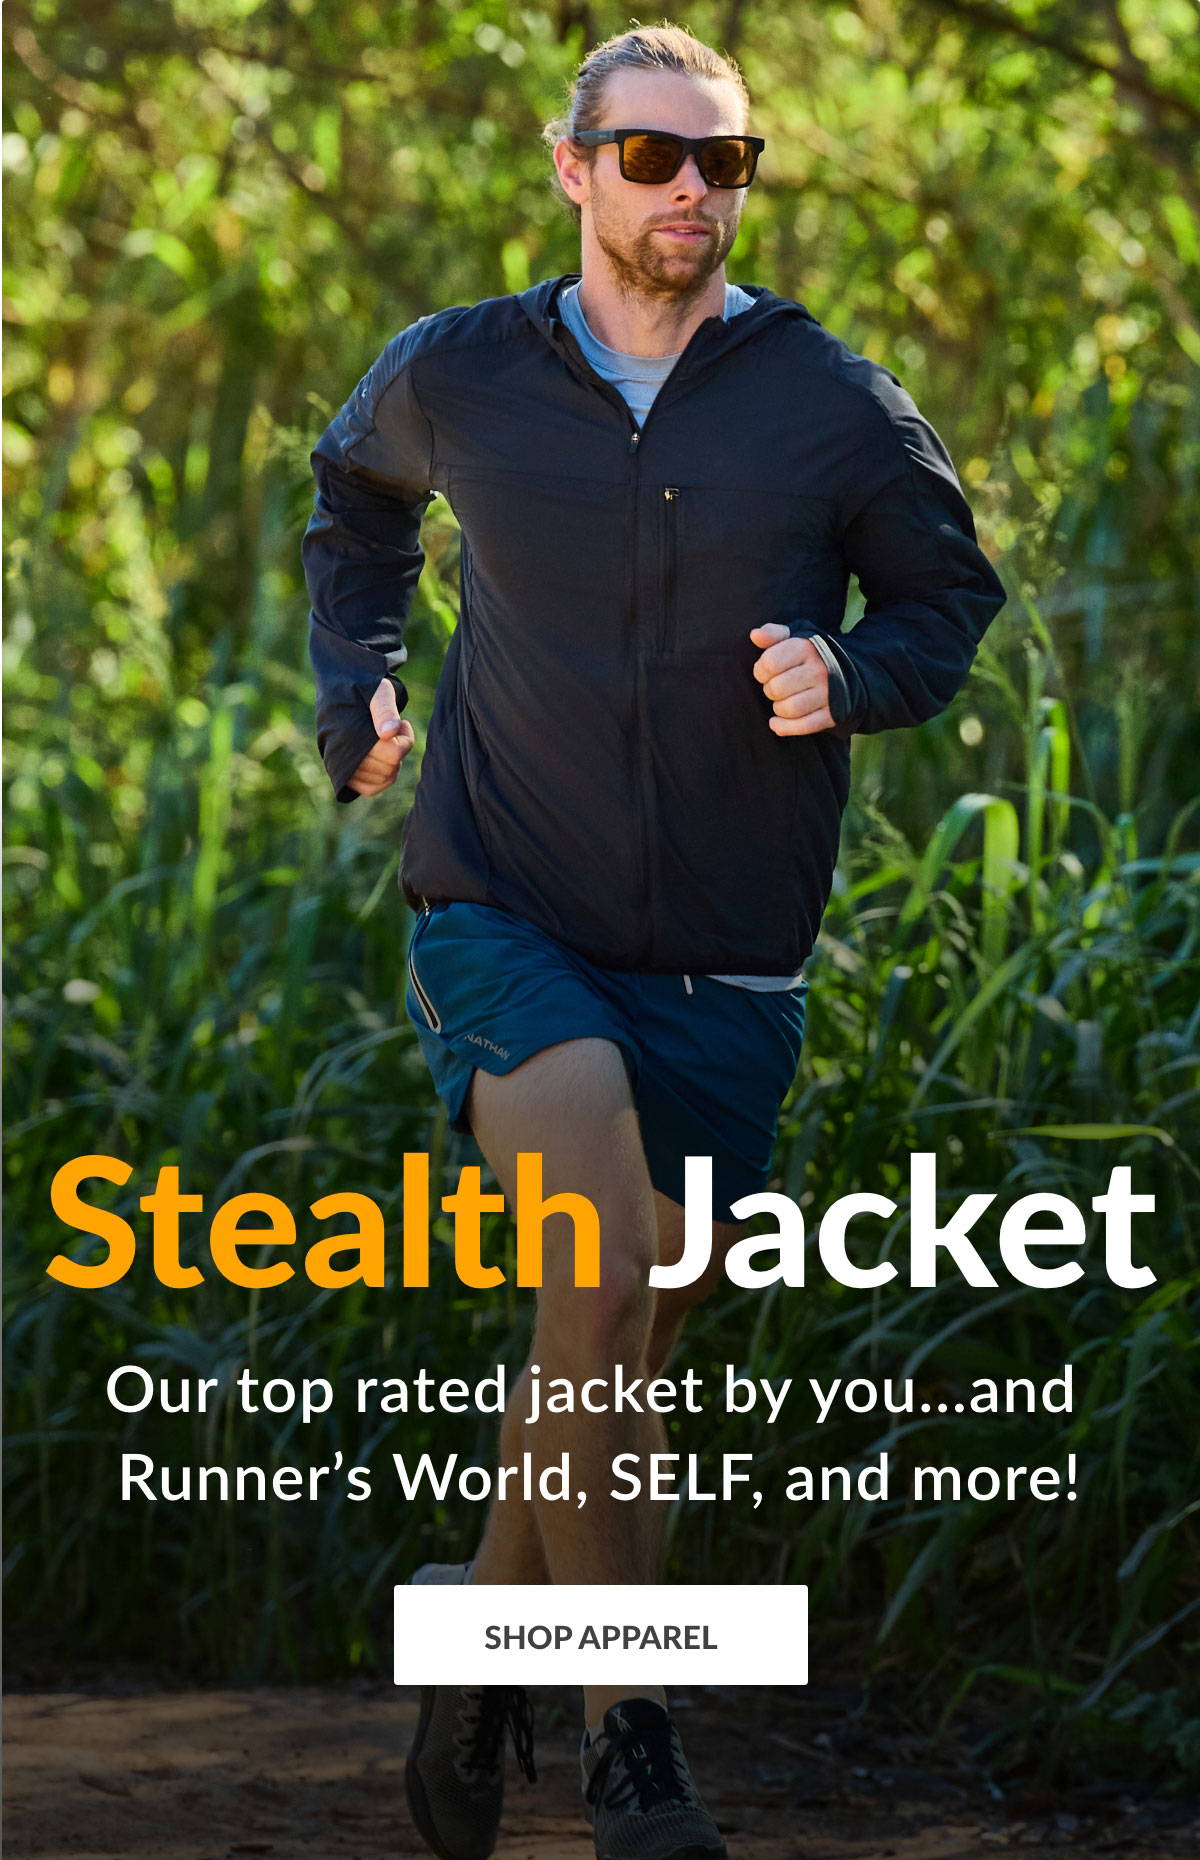 Stealth Jacket - Our Top Rated Jacket By You...and Runner's World, SELF, and More! - SHOP STEALTH